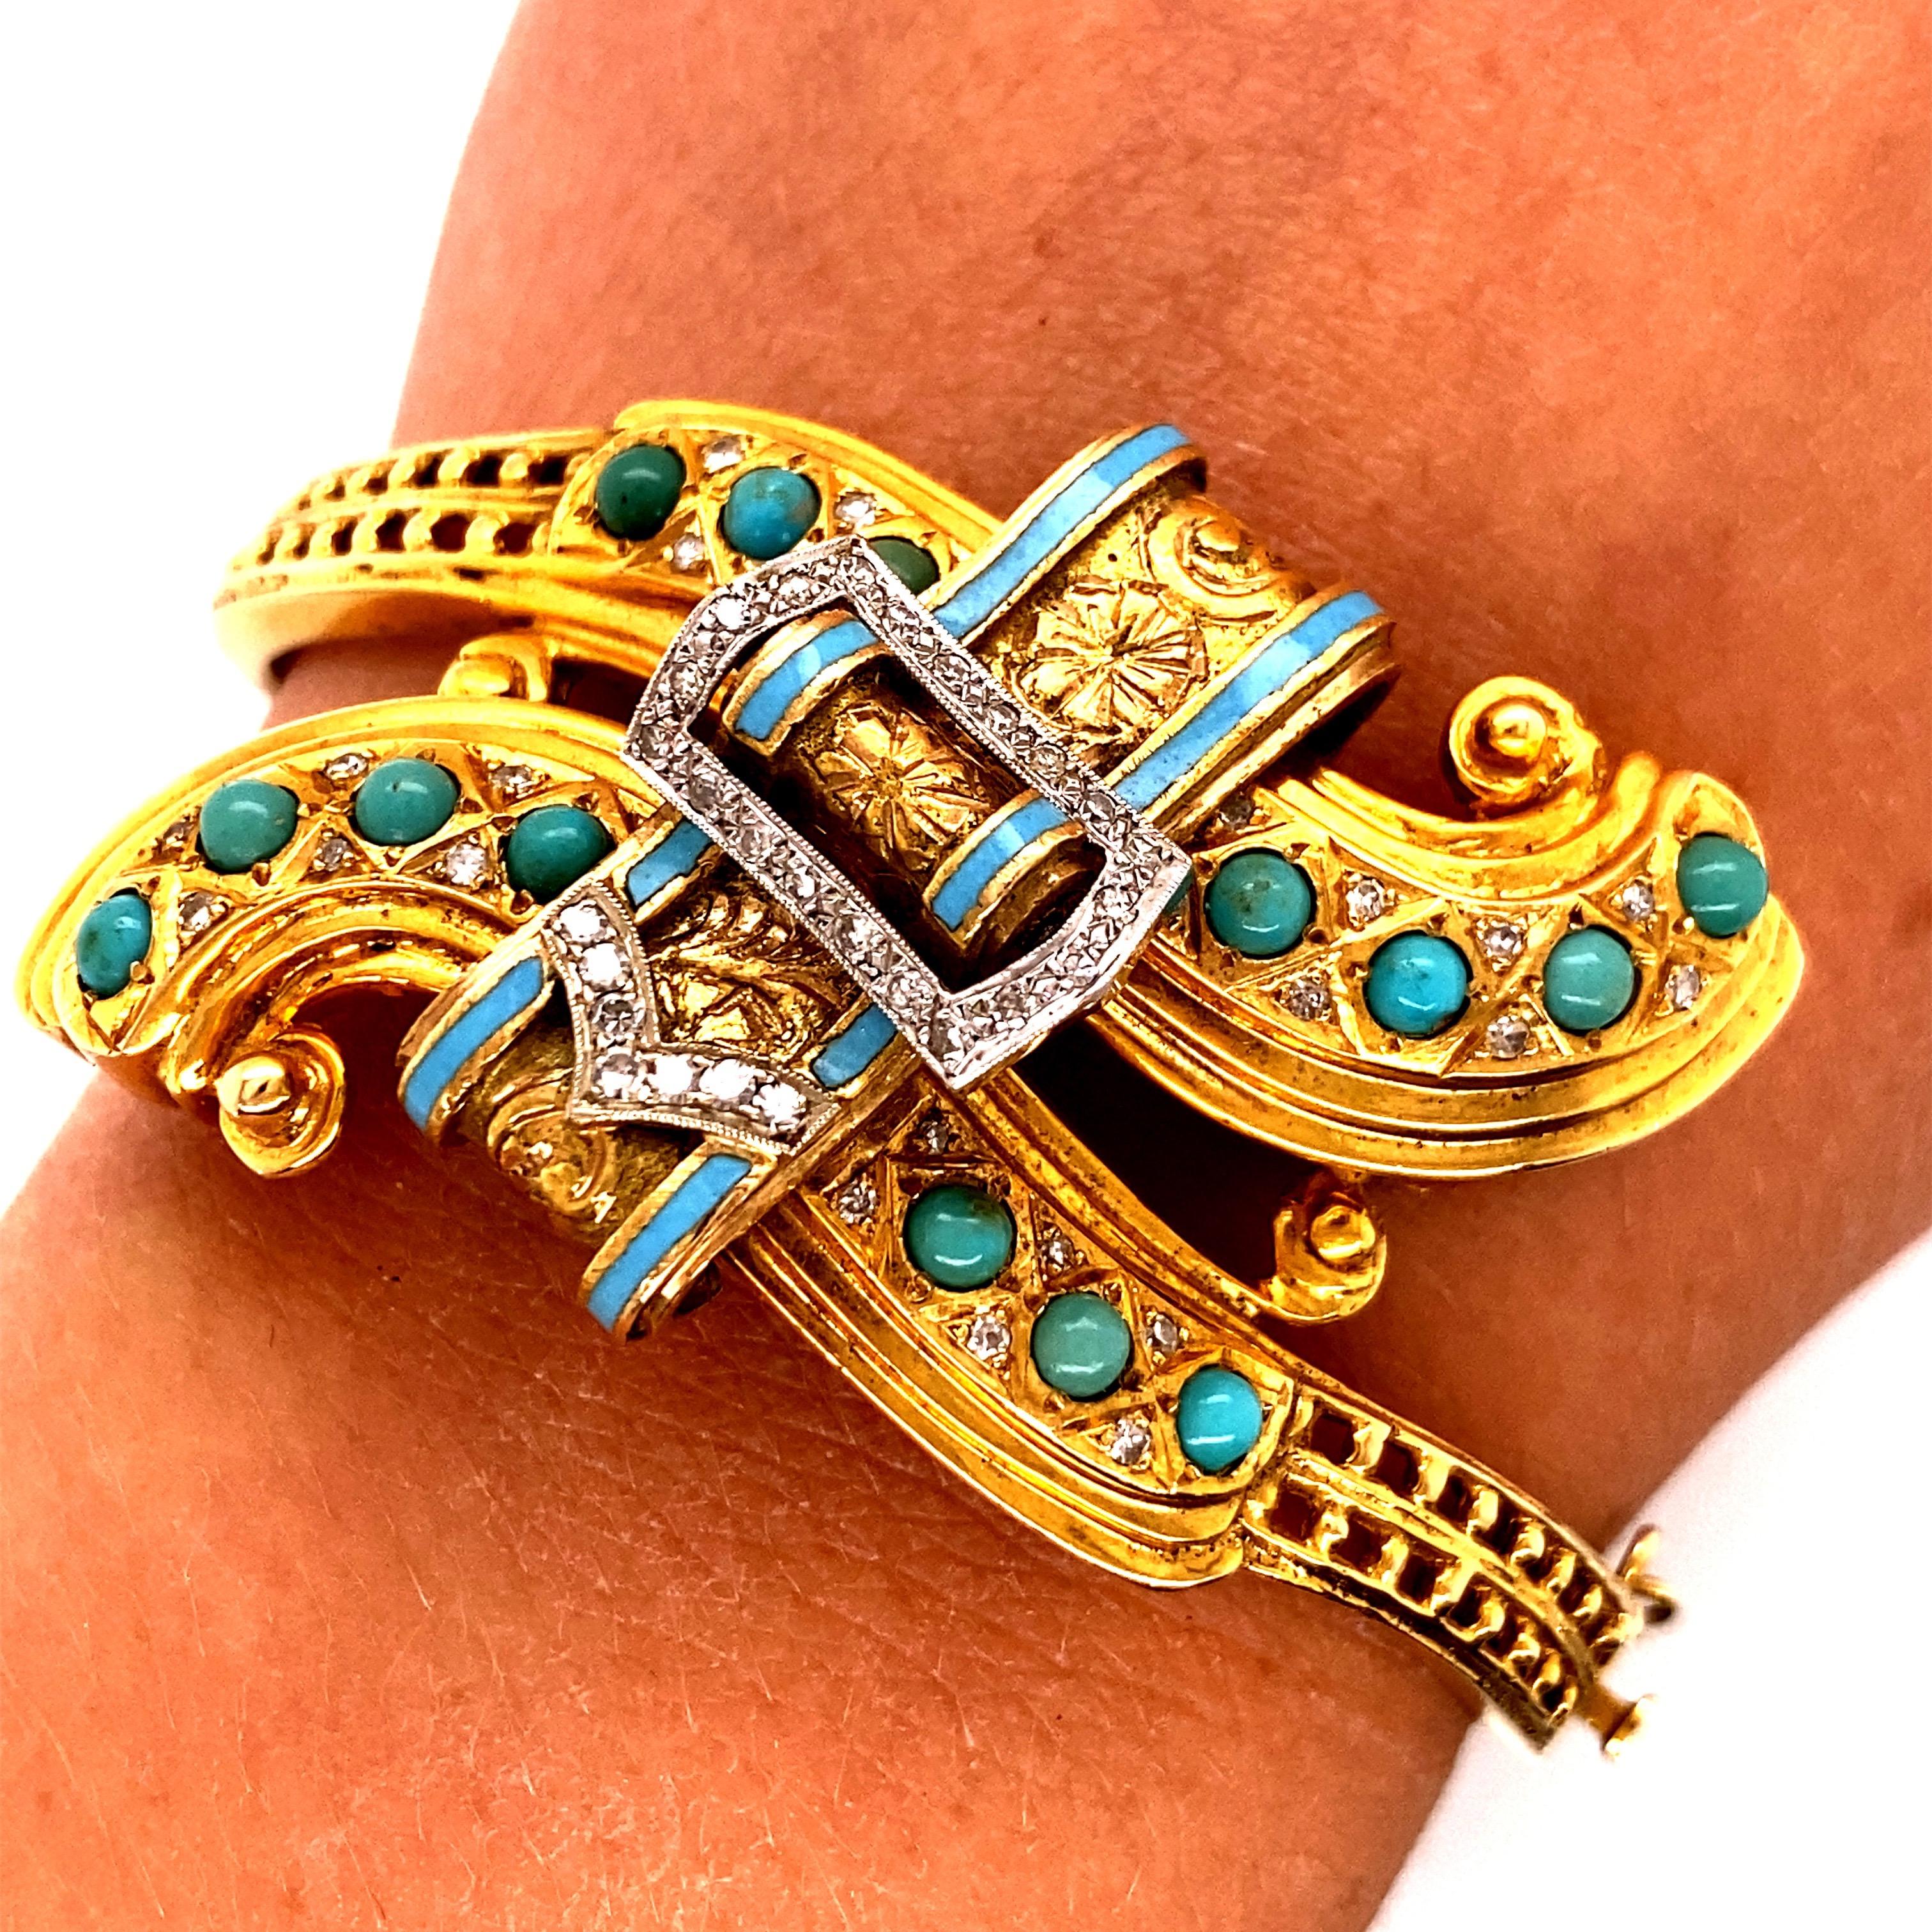 Vintage 14k Yellow Gold Wide Bypass Buckle Design with Turquoise Bangle - The width of the bangle on top 1.25 inches. There are 14 turquoise beads on the bypass. The buckle is set with 27 small single cut diamonds and has turquoise blue enamel. The